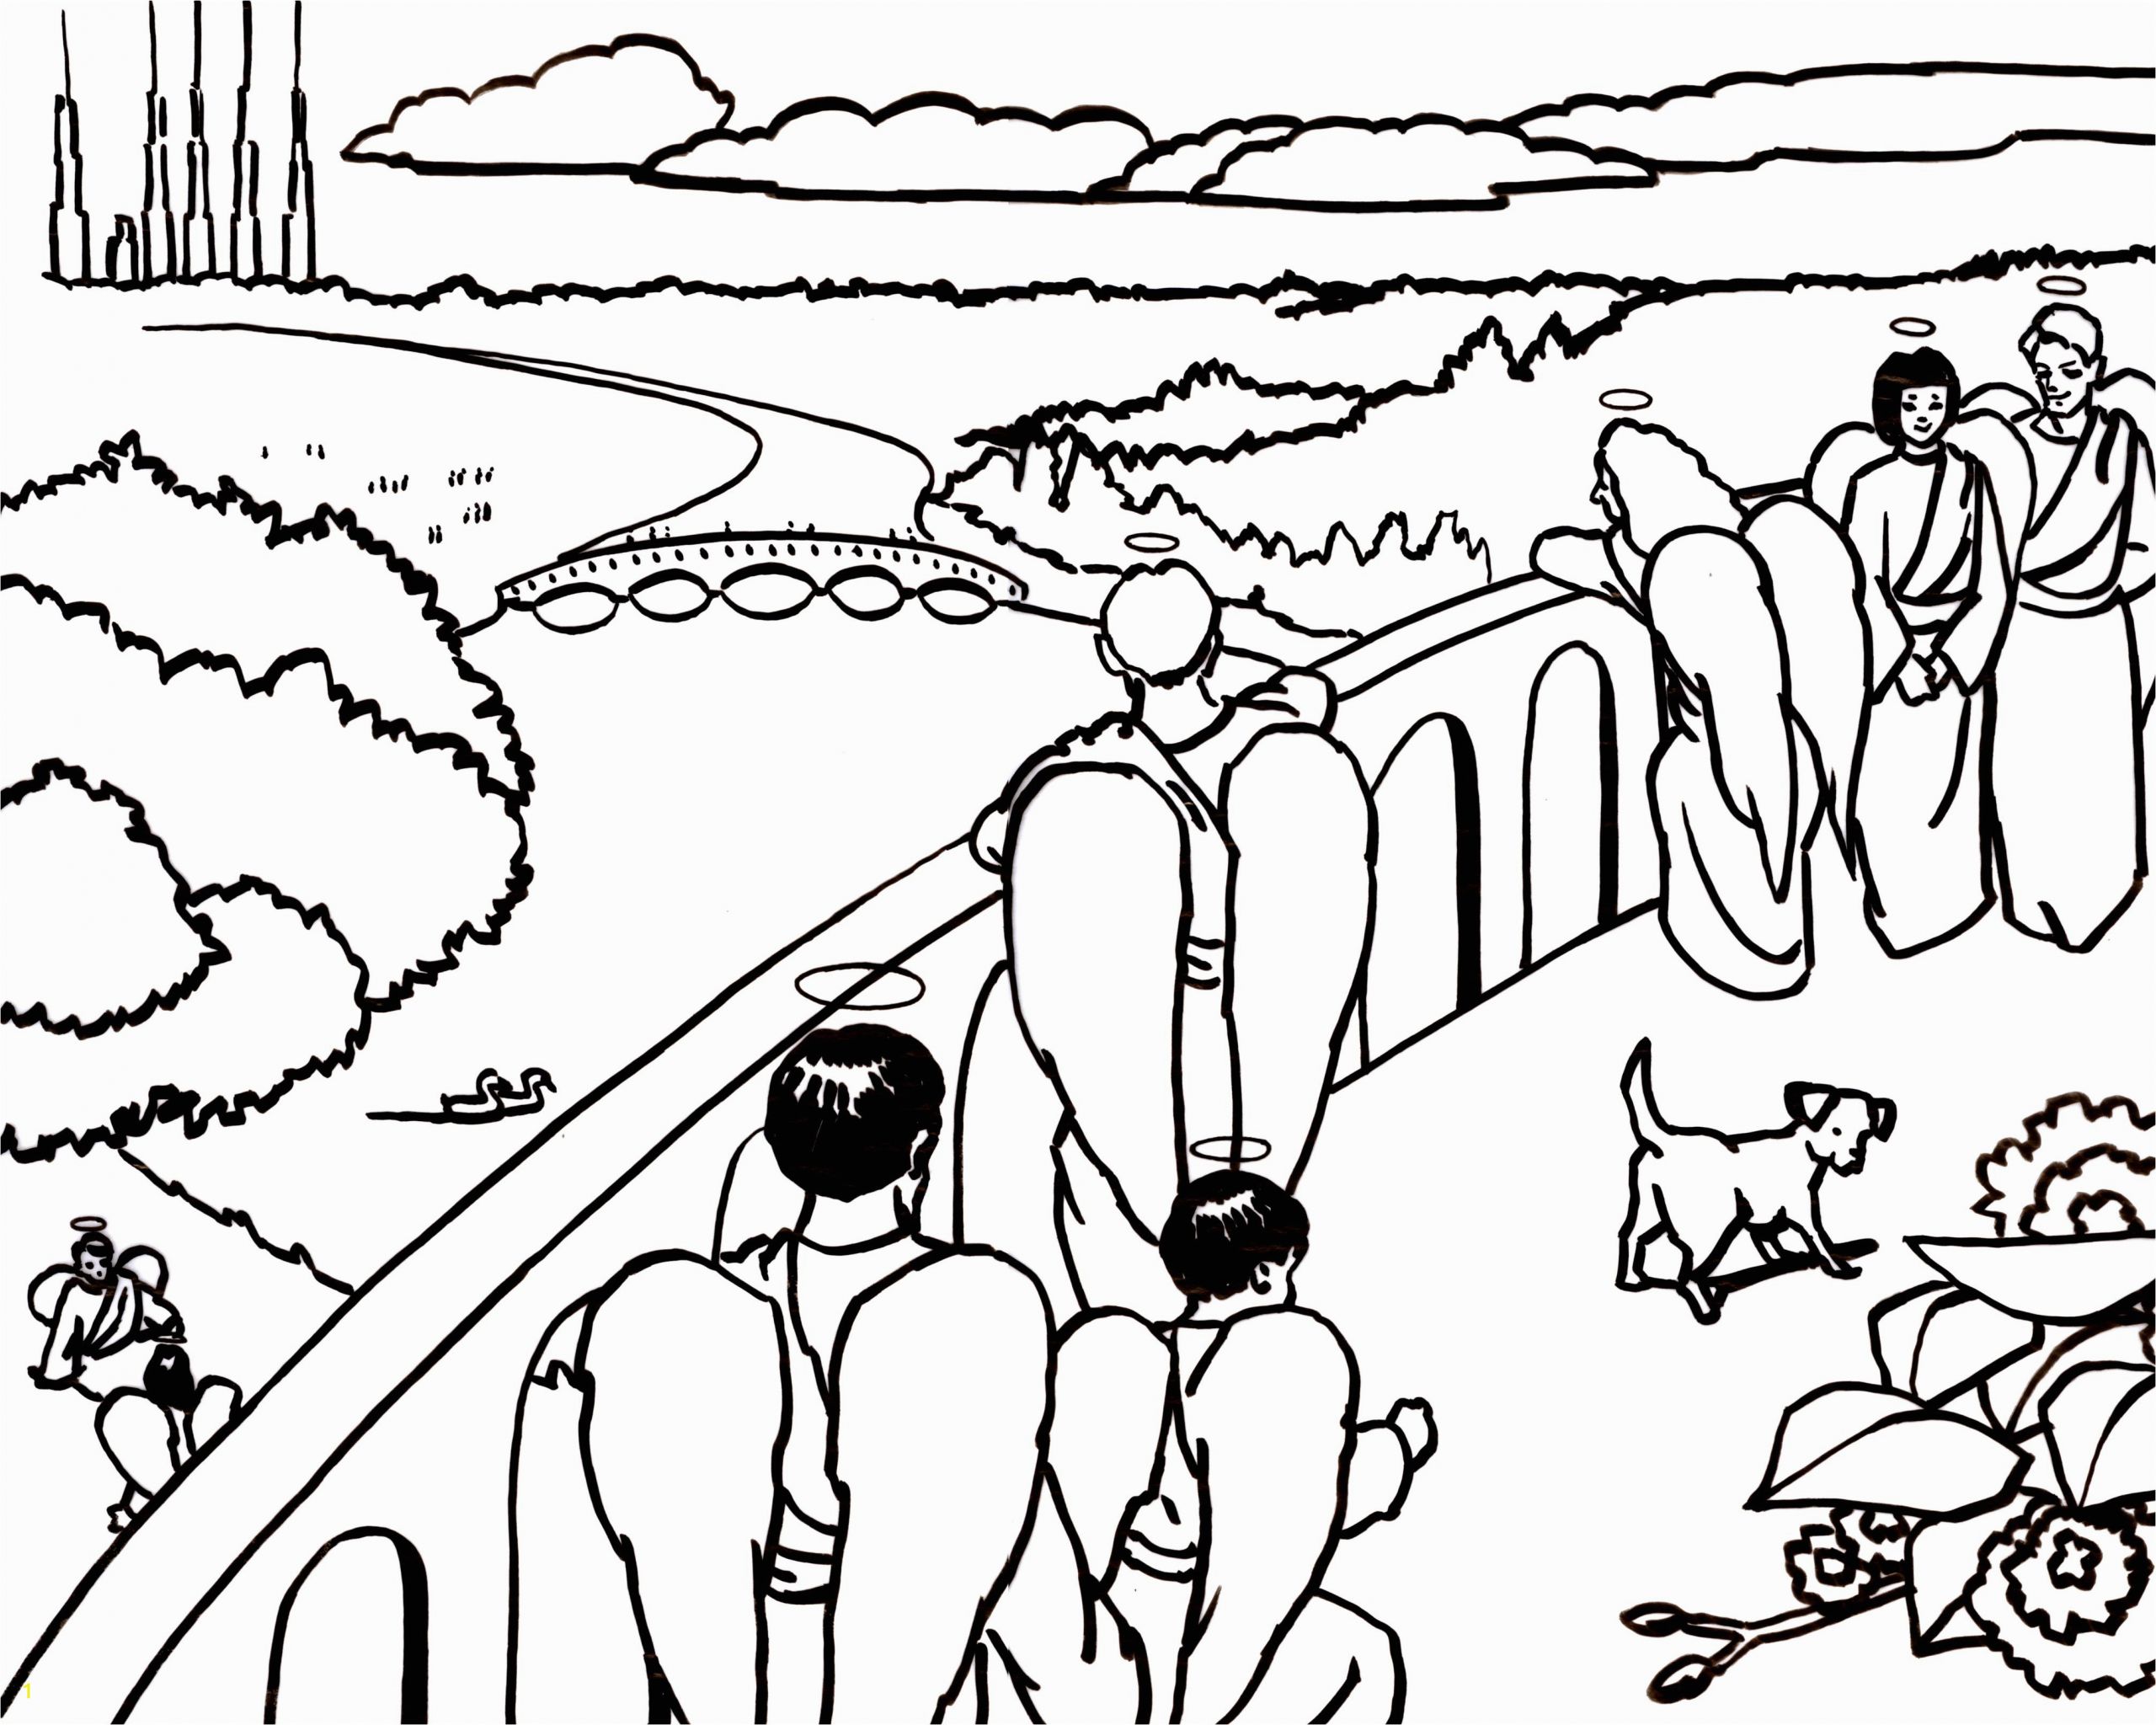 Heaven is for Real Coloring Pages the Heaven is for Real App Has Beautiful Coloring Pages